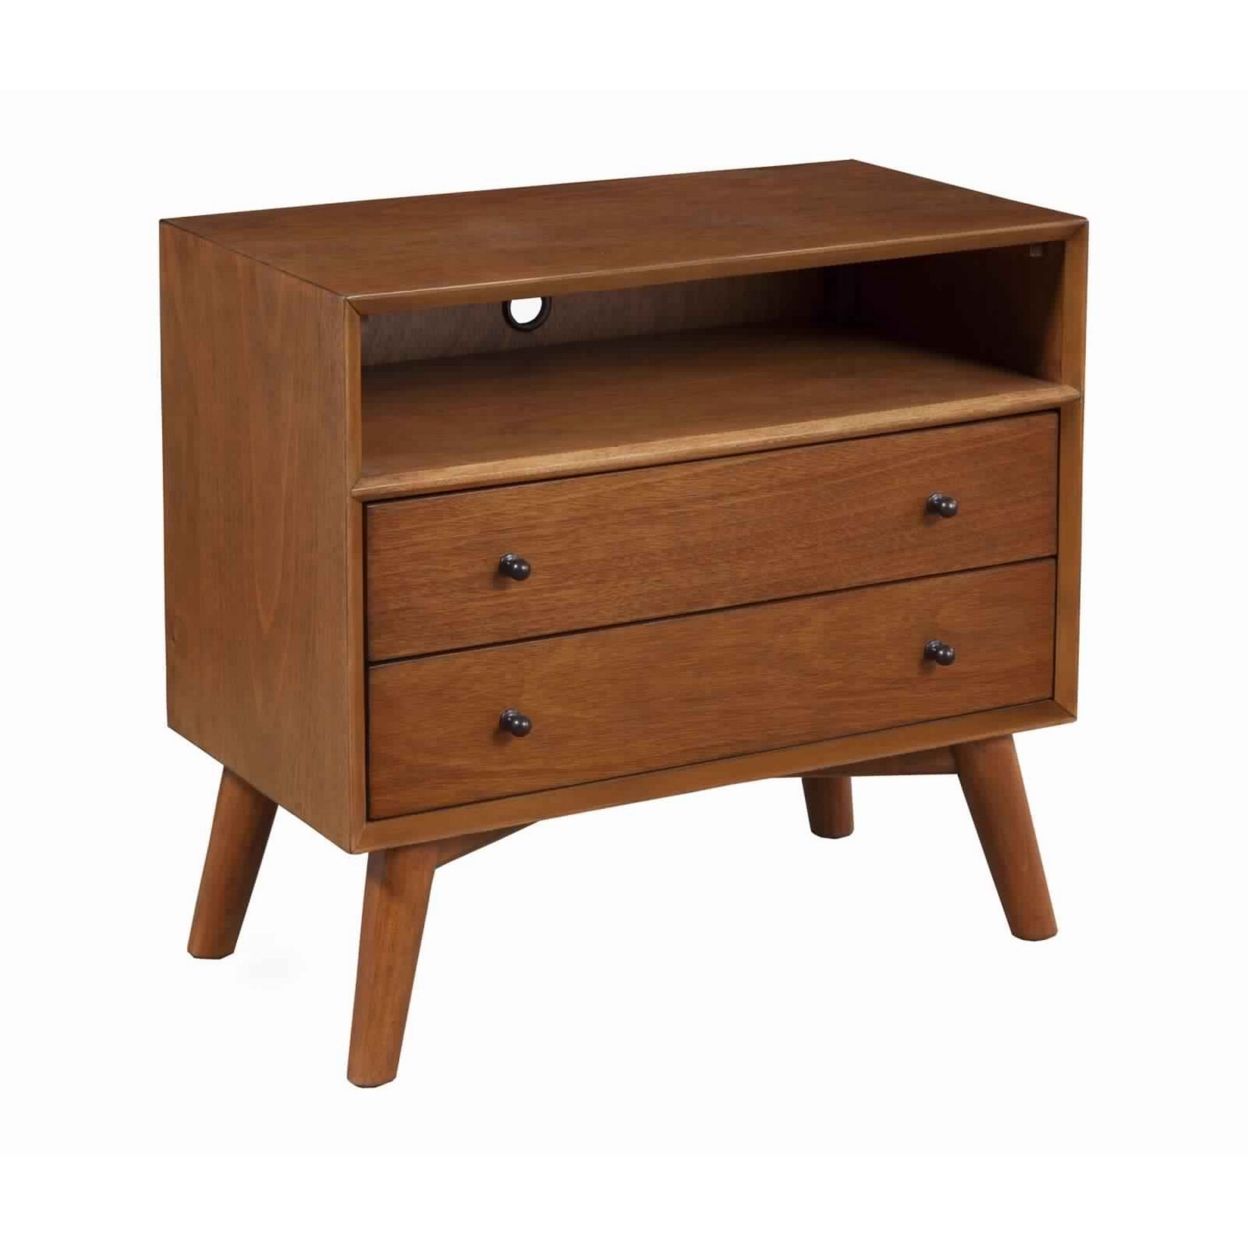 2 Drawer Wooden Nightstand With Open Compartment And Splayed Legs, Brown- Saltoro Sherpi